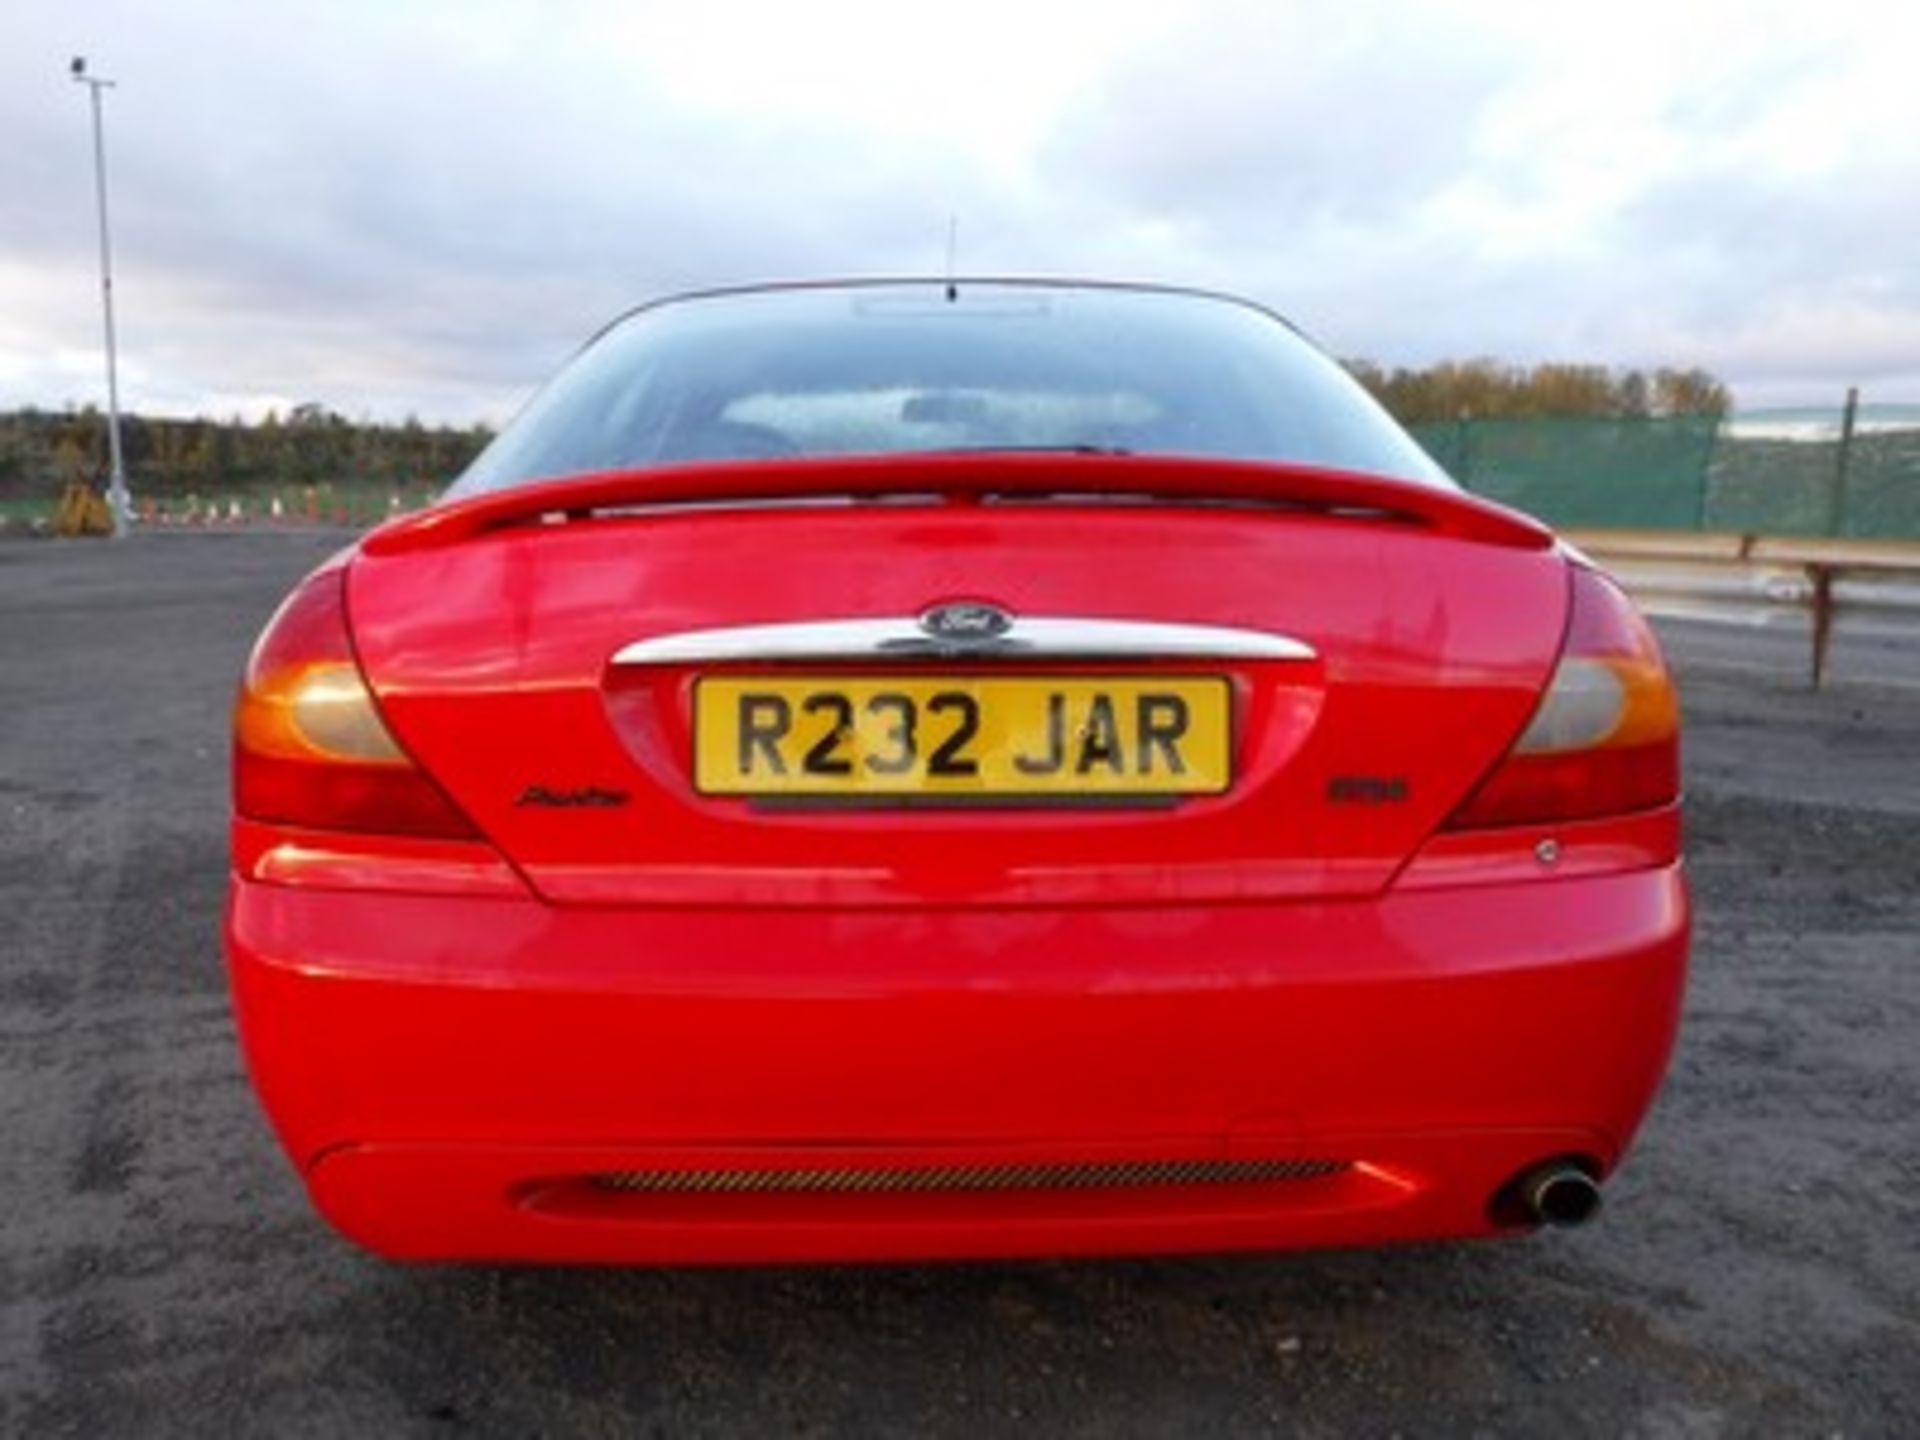 FORD MONDEO ST 24 V6 - 2497cc - Image 11 of 24